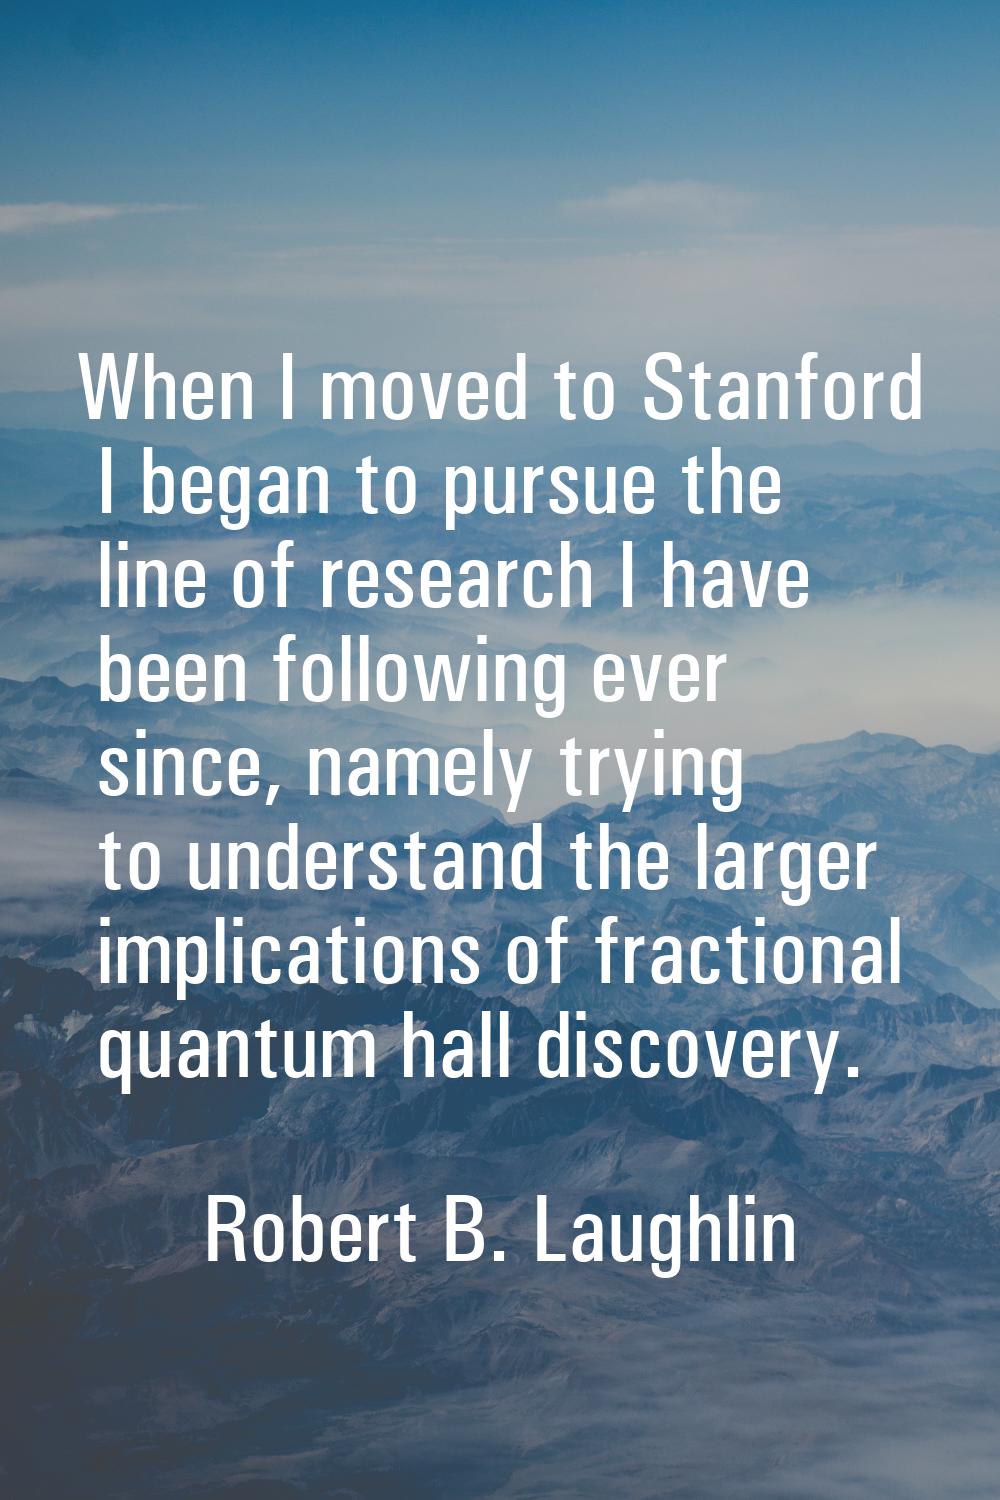 When I moved to Stanford I began to pursue the line of research I have been following ever since, n